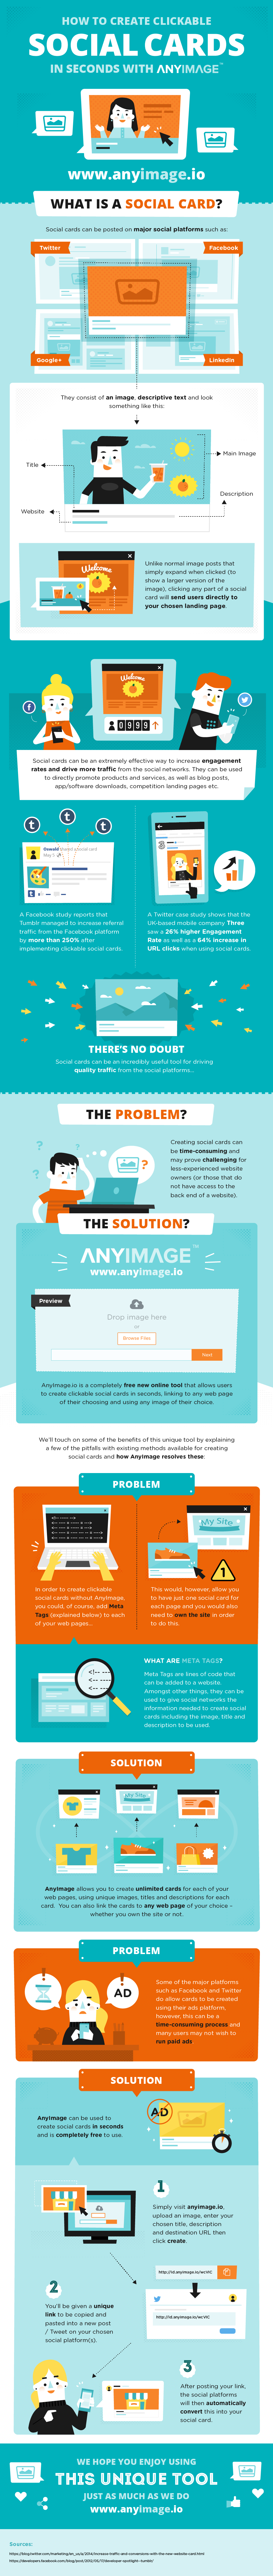 AnyImage Infographic